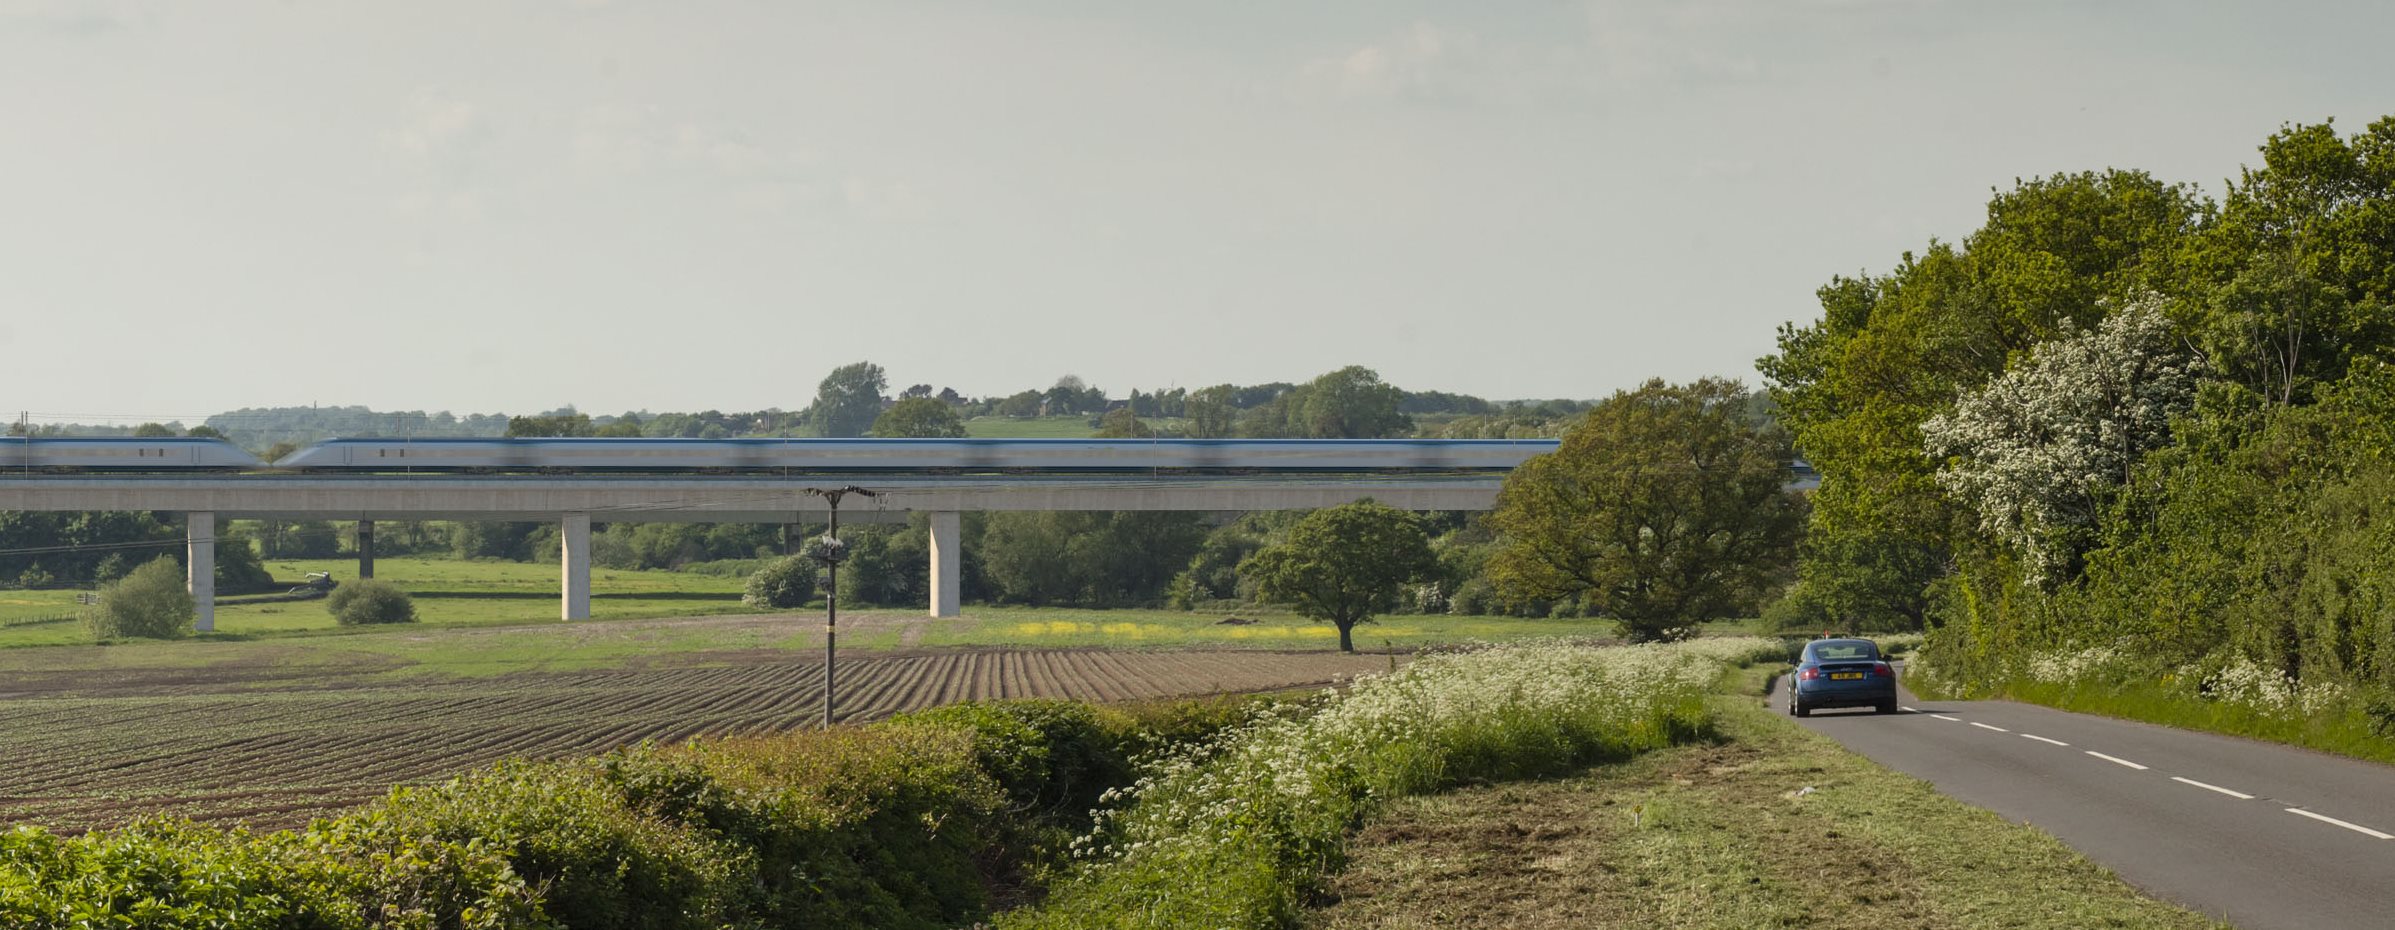 view of HS2 train crossing a rural road